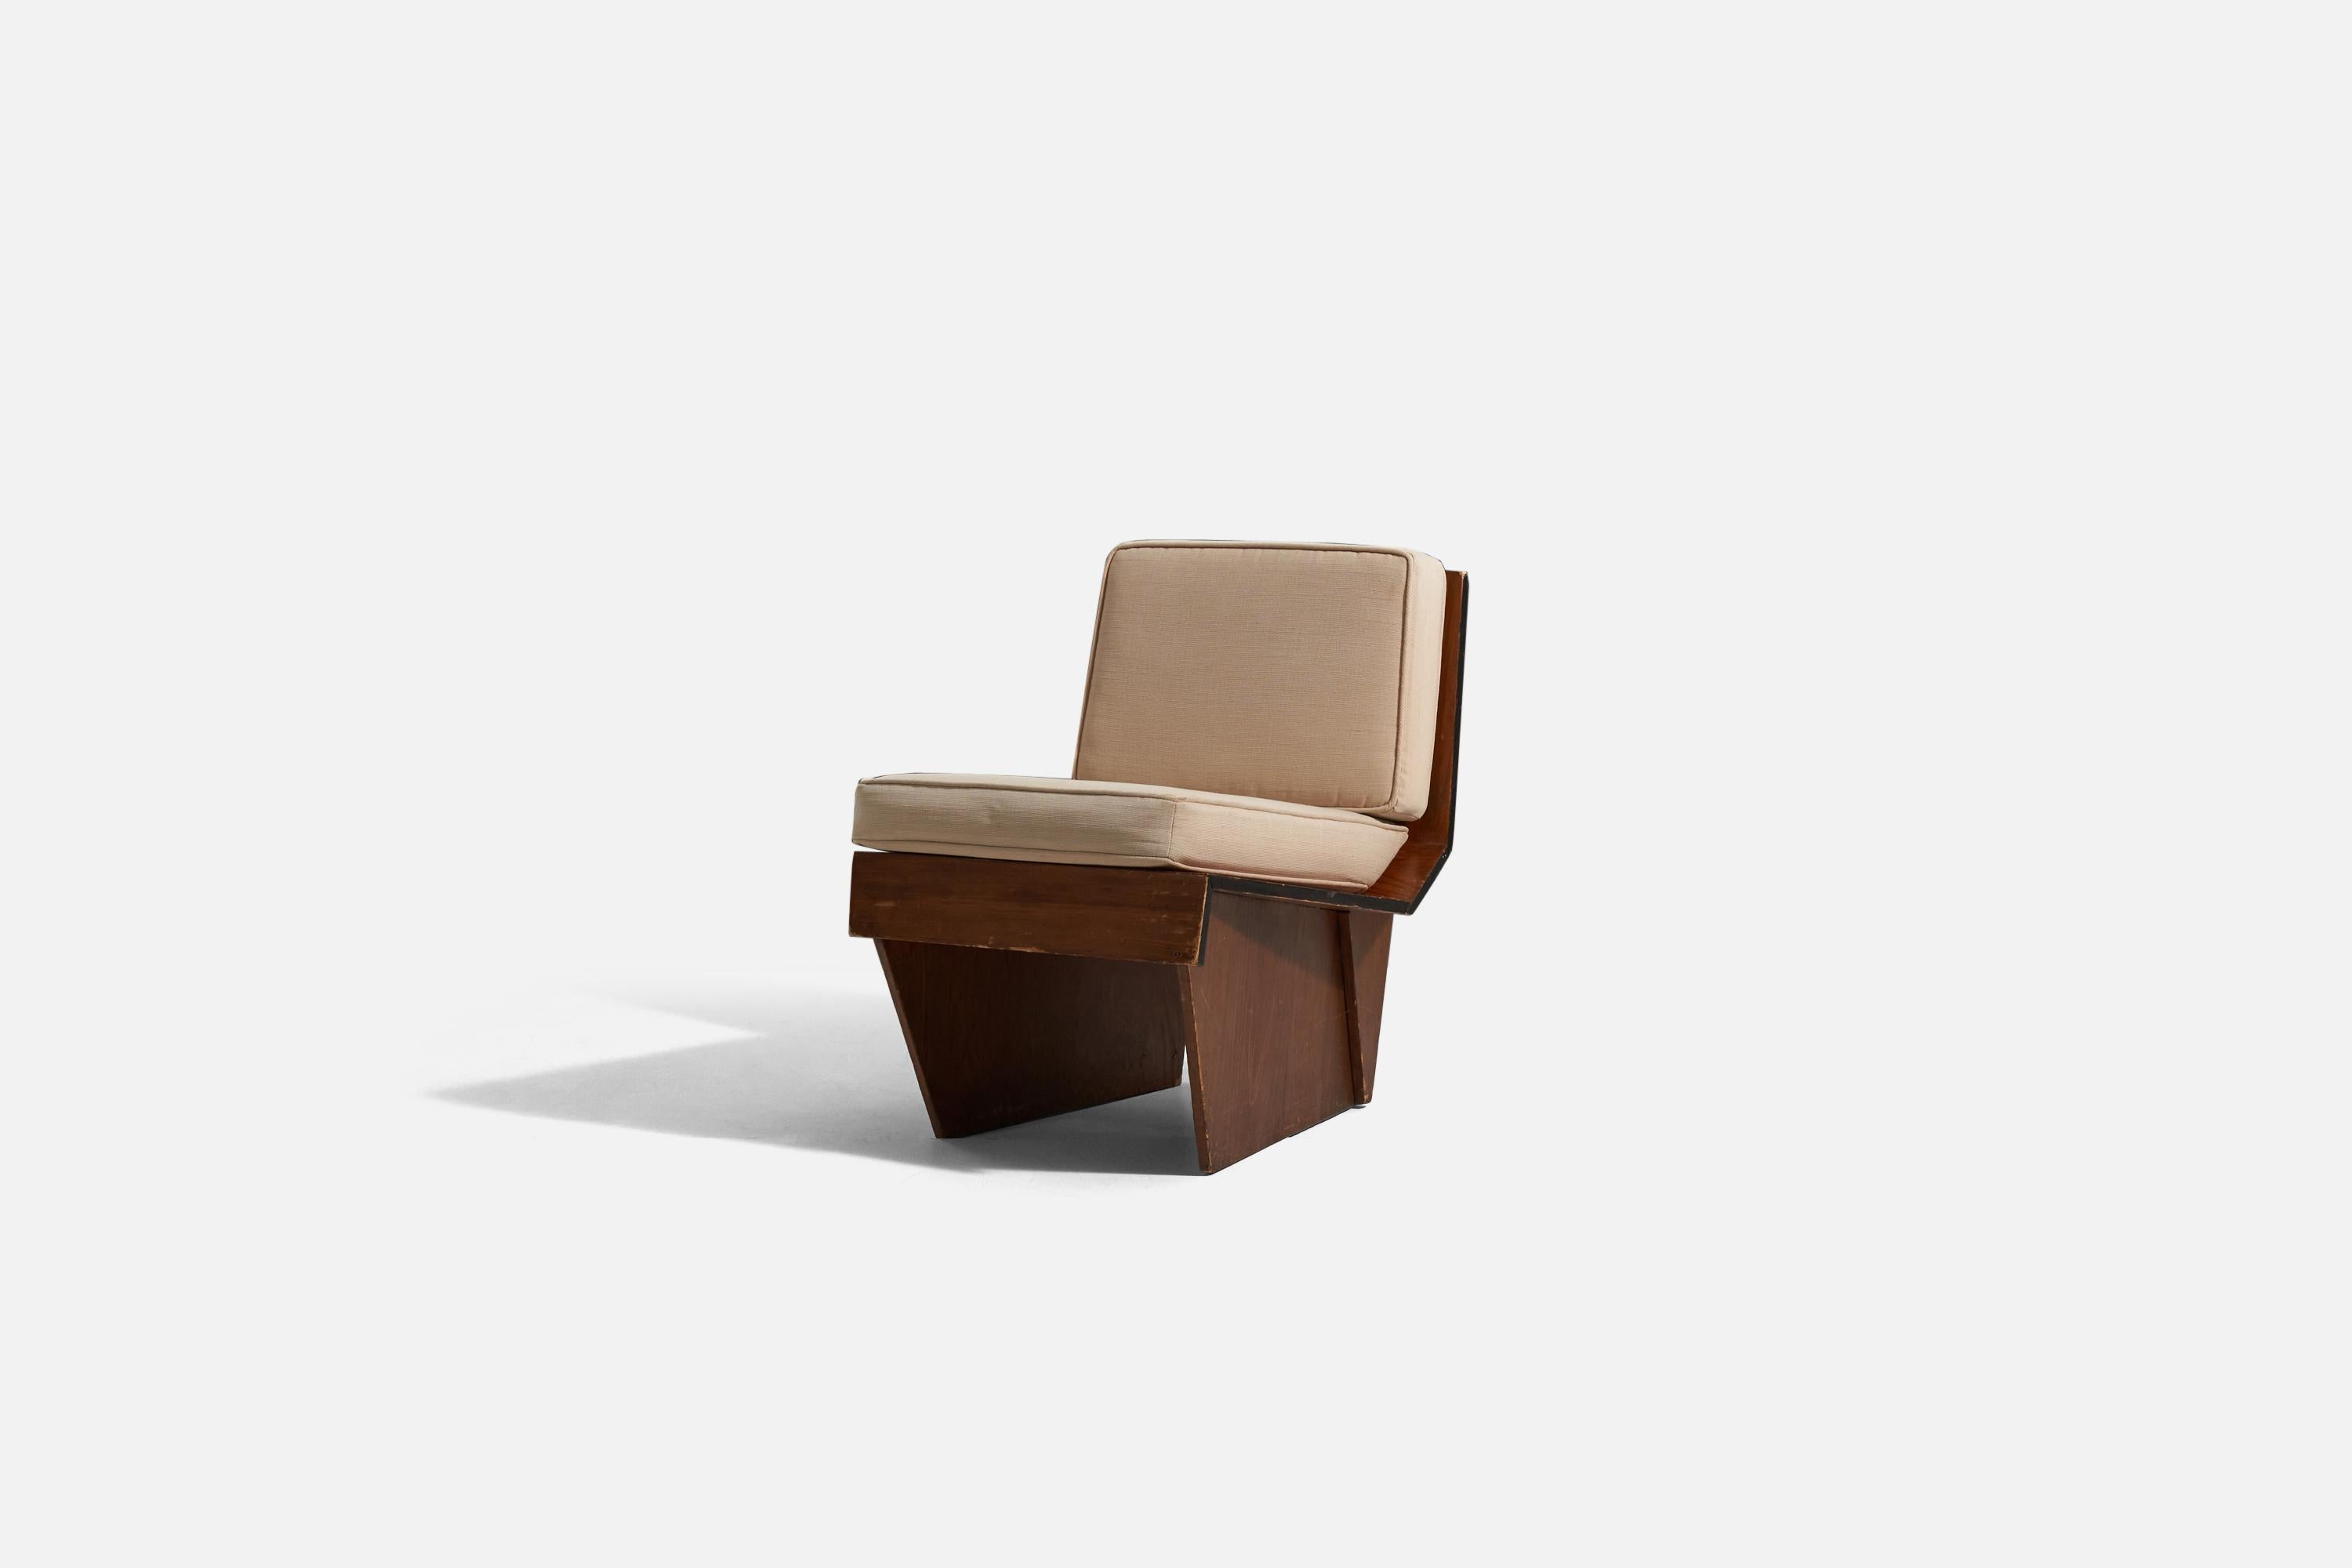 A wood and fabric lounge chair designed by Frank Lloyd Wright, produced by his Taliesin studio, United States, 1938.

Frank Lloyd Wright chair for the Charles L. and Dorothy Manson House, Wausau, Wisconsin, 1938

The Manson House is documented